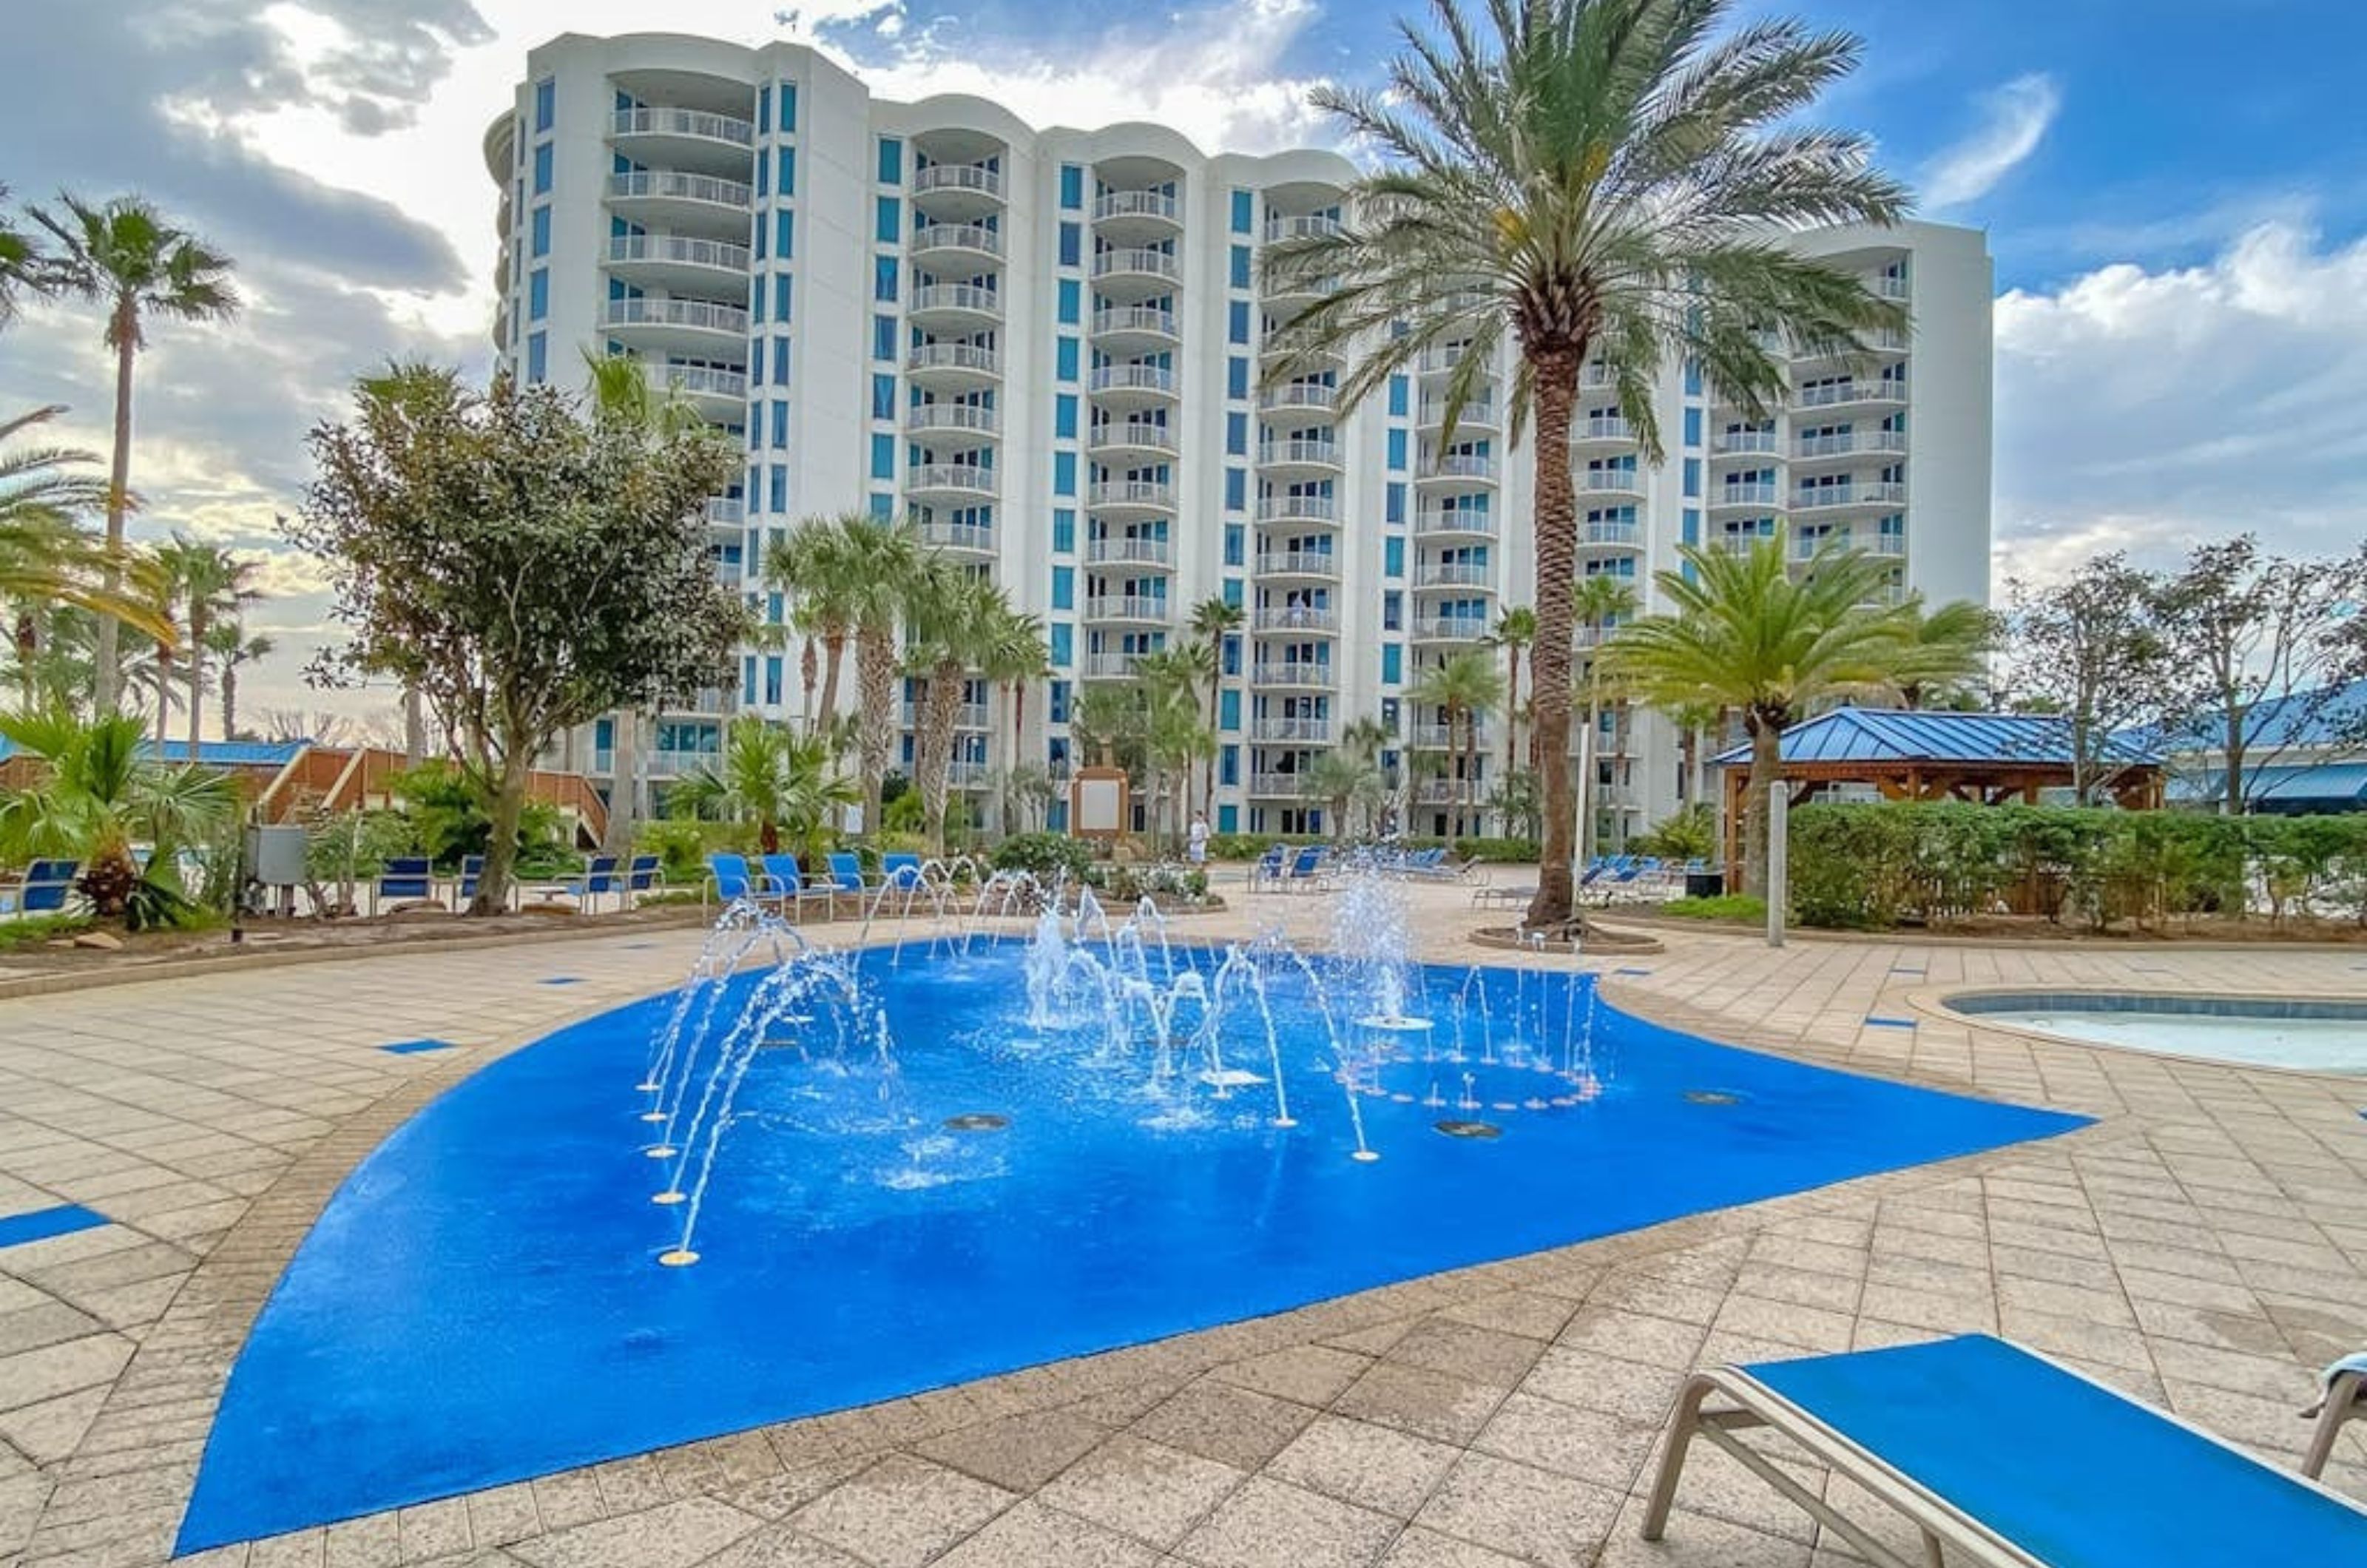 The outdoor splash pad in front of the Palms of Destin in Destin Florida